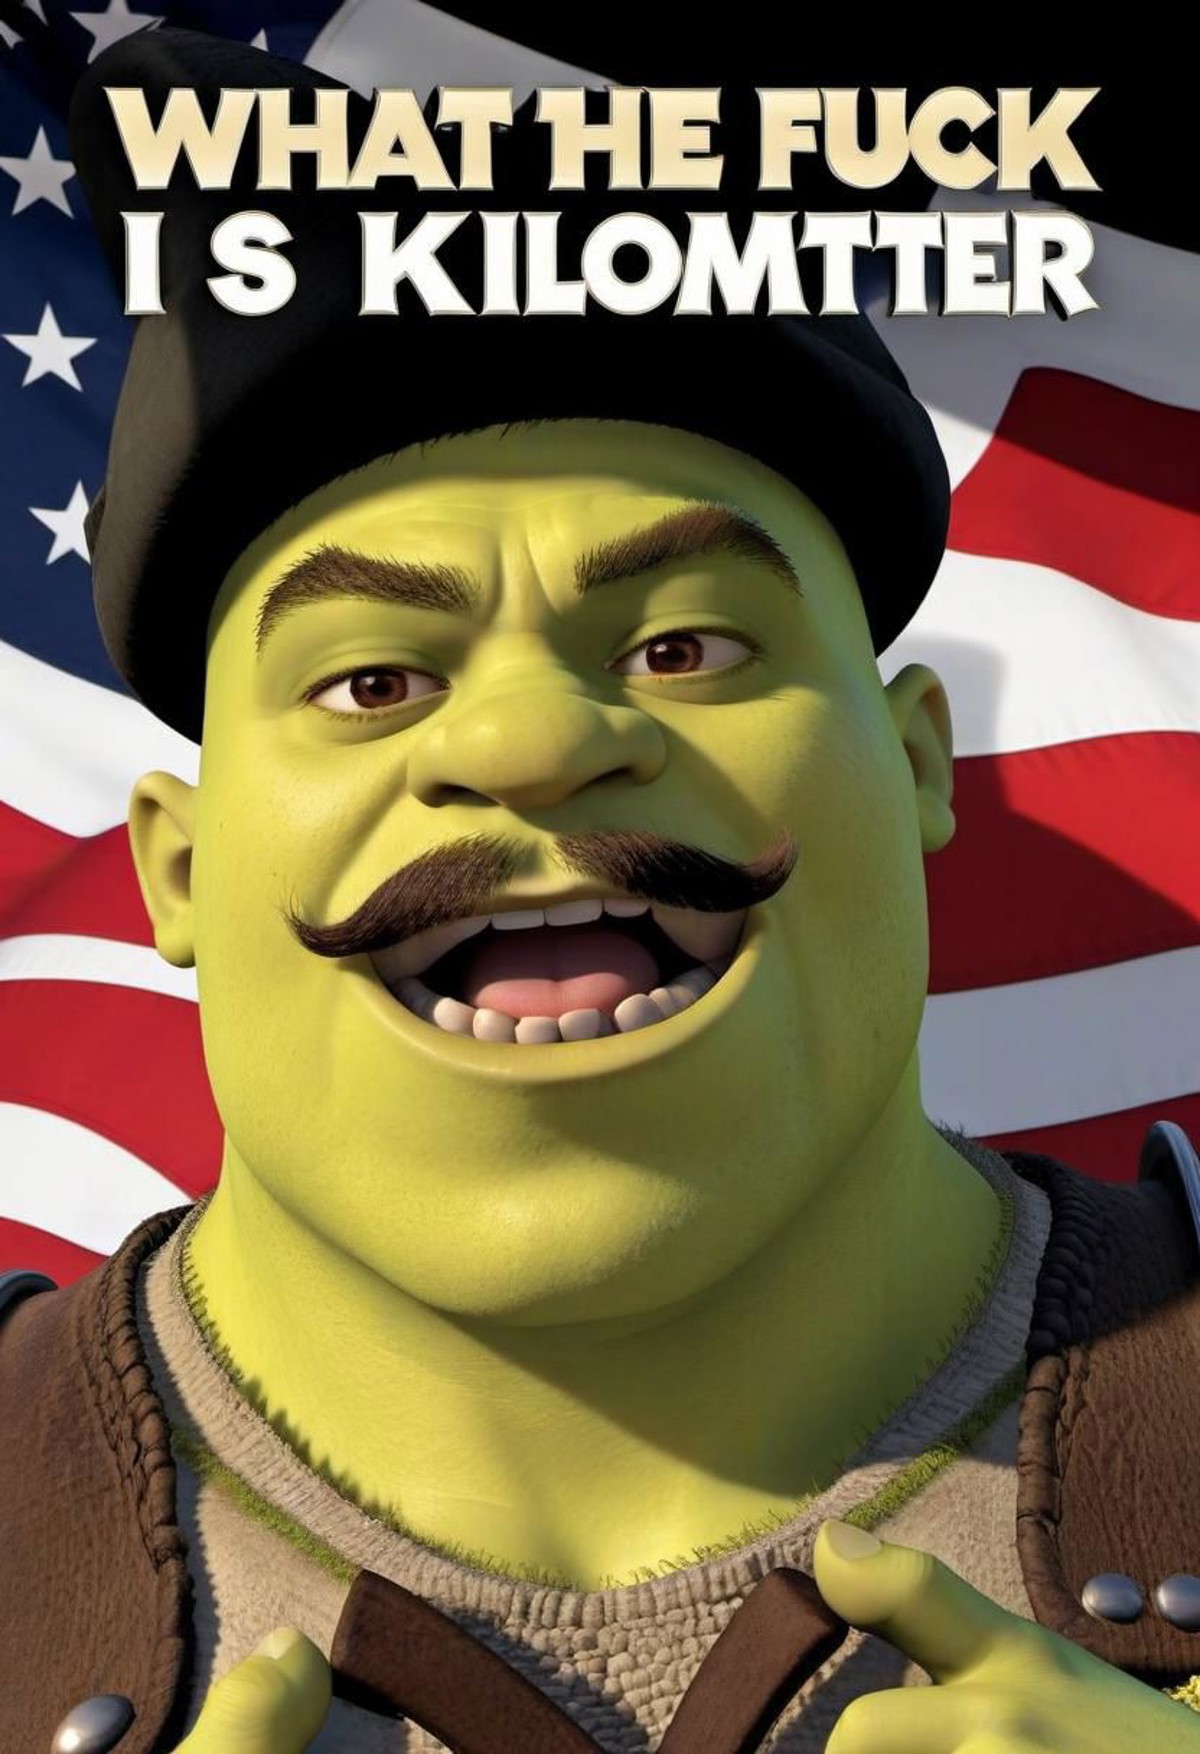 ("What*The*Fuck*Is*A*Kilometer" logo text), Action shot, Shrek1024 as soldier, (wears camouflage shirt), ((military unifor...